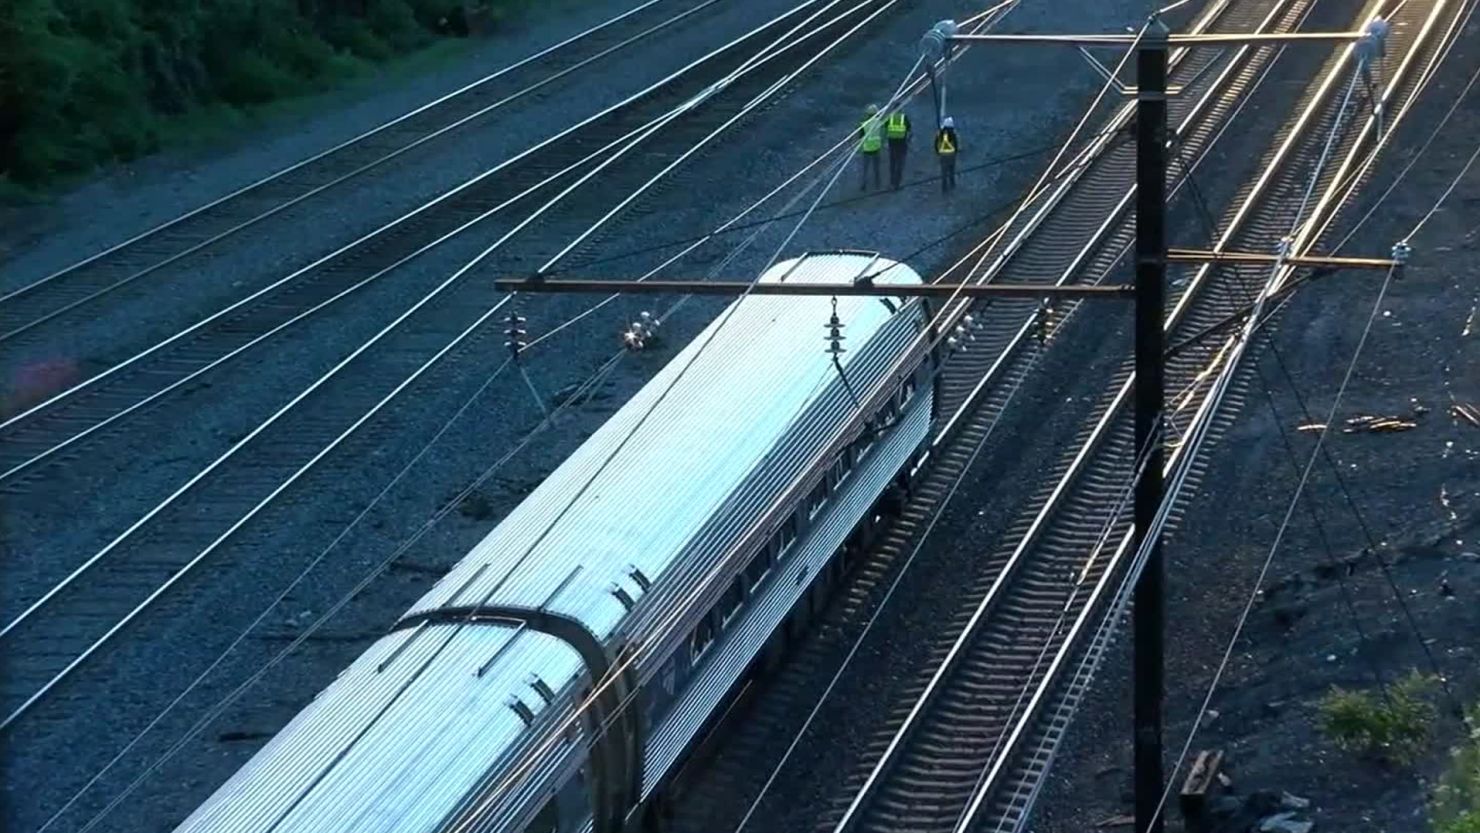 Amtrak Train 175 struck and killed two CSX workers while approaching Washington DC's Union Station.